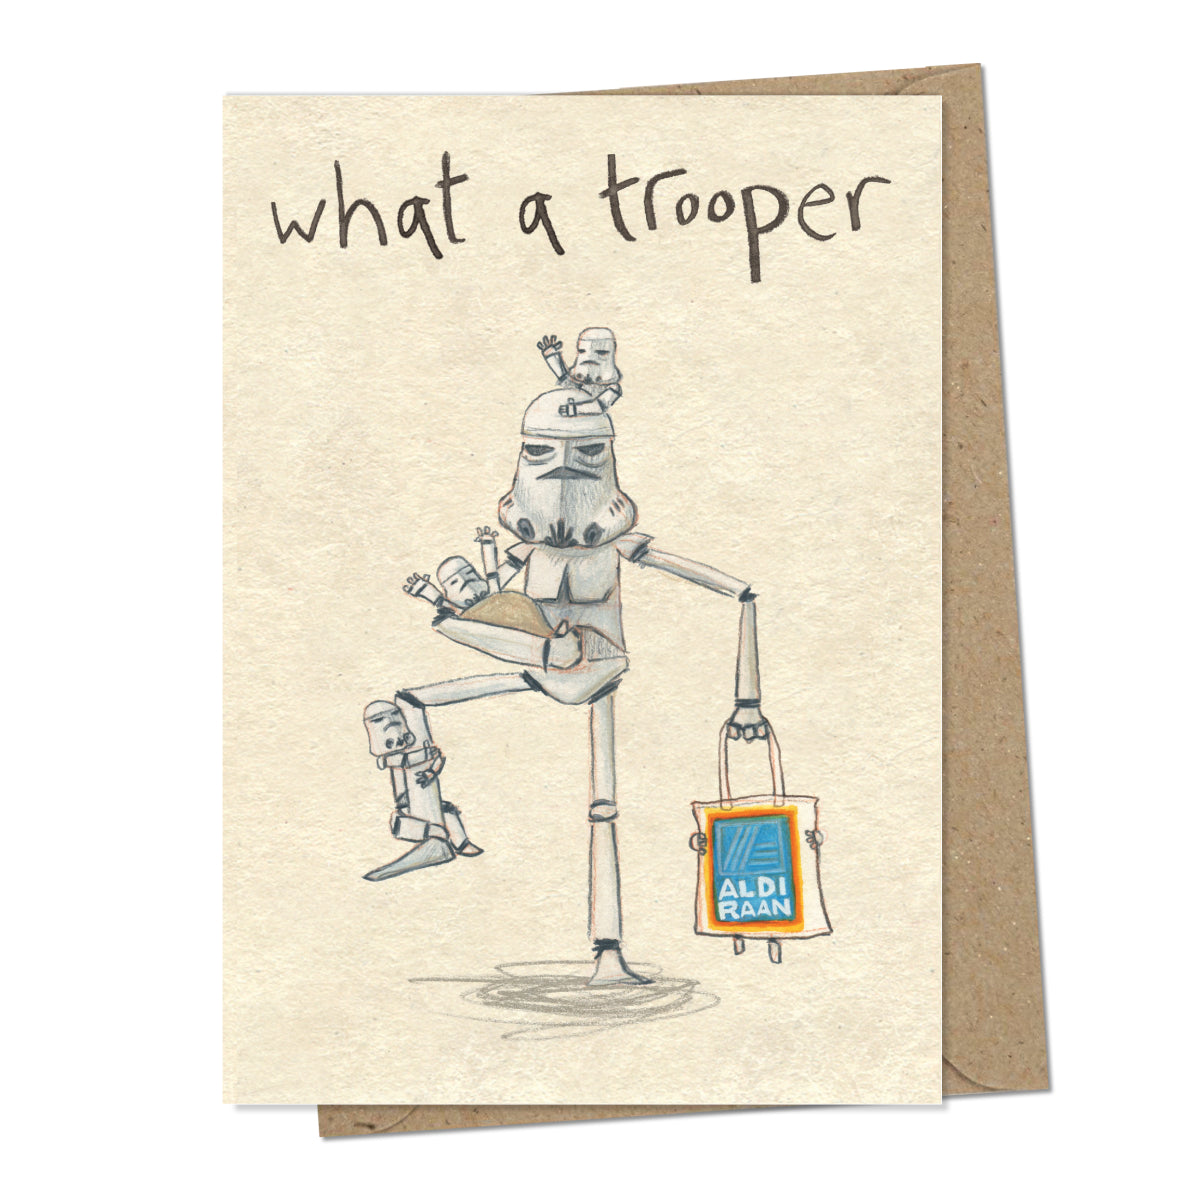 A greetings card with a mottled beige background and above the illustration are handwritten words 'what a trooper'. The illustration is of a white Storm Trooper from the movie Star Wars wrangling mini Storm Troopers including a baby one, struggling to hold them all. In another hand they are holding a carrier bag that is in the style of one from Aldi but is a play on words referencing a planet in the Star Wars Universe - Aldi-raan.